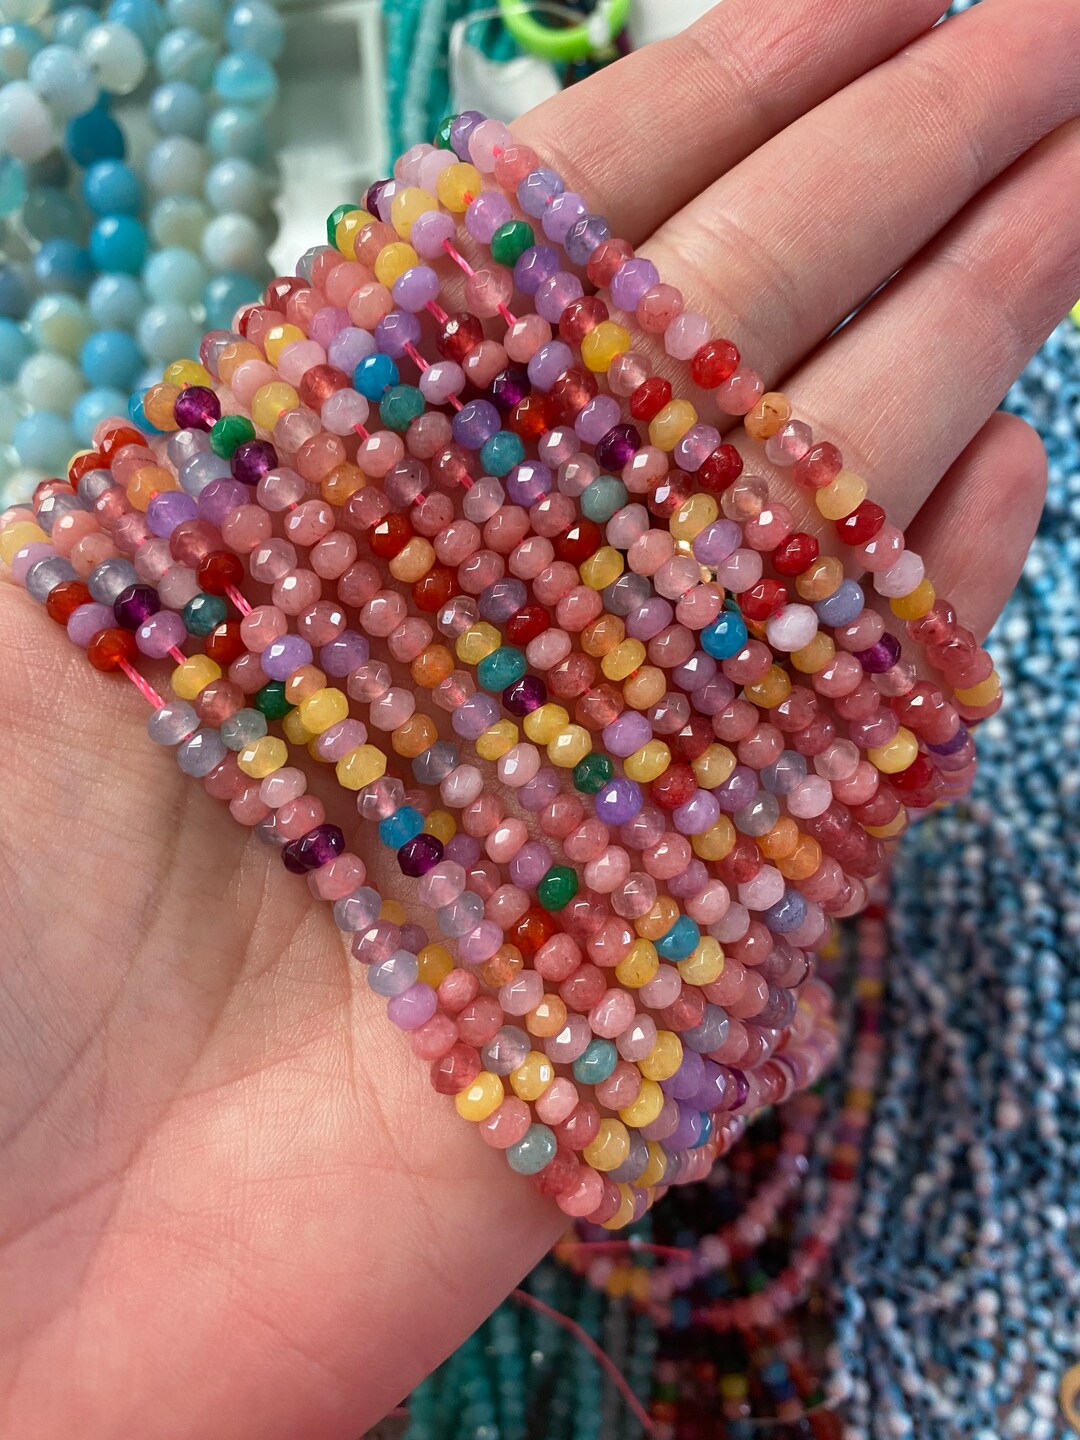 DIY Seed Bead Kit for Kids Arts & Crafts,bracelets,mask Chain,tiny Colorful Waist  Bead Box Kit,beads for Mask Chains,jewelry Making for Kids 